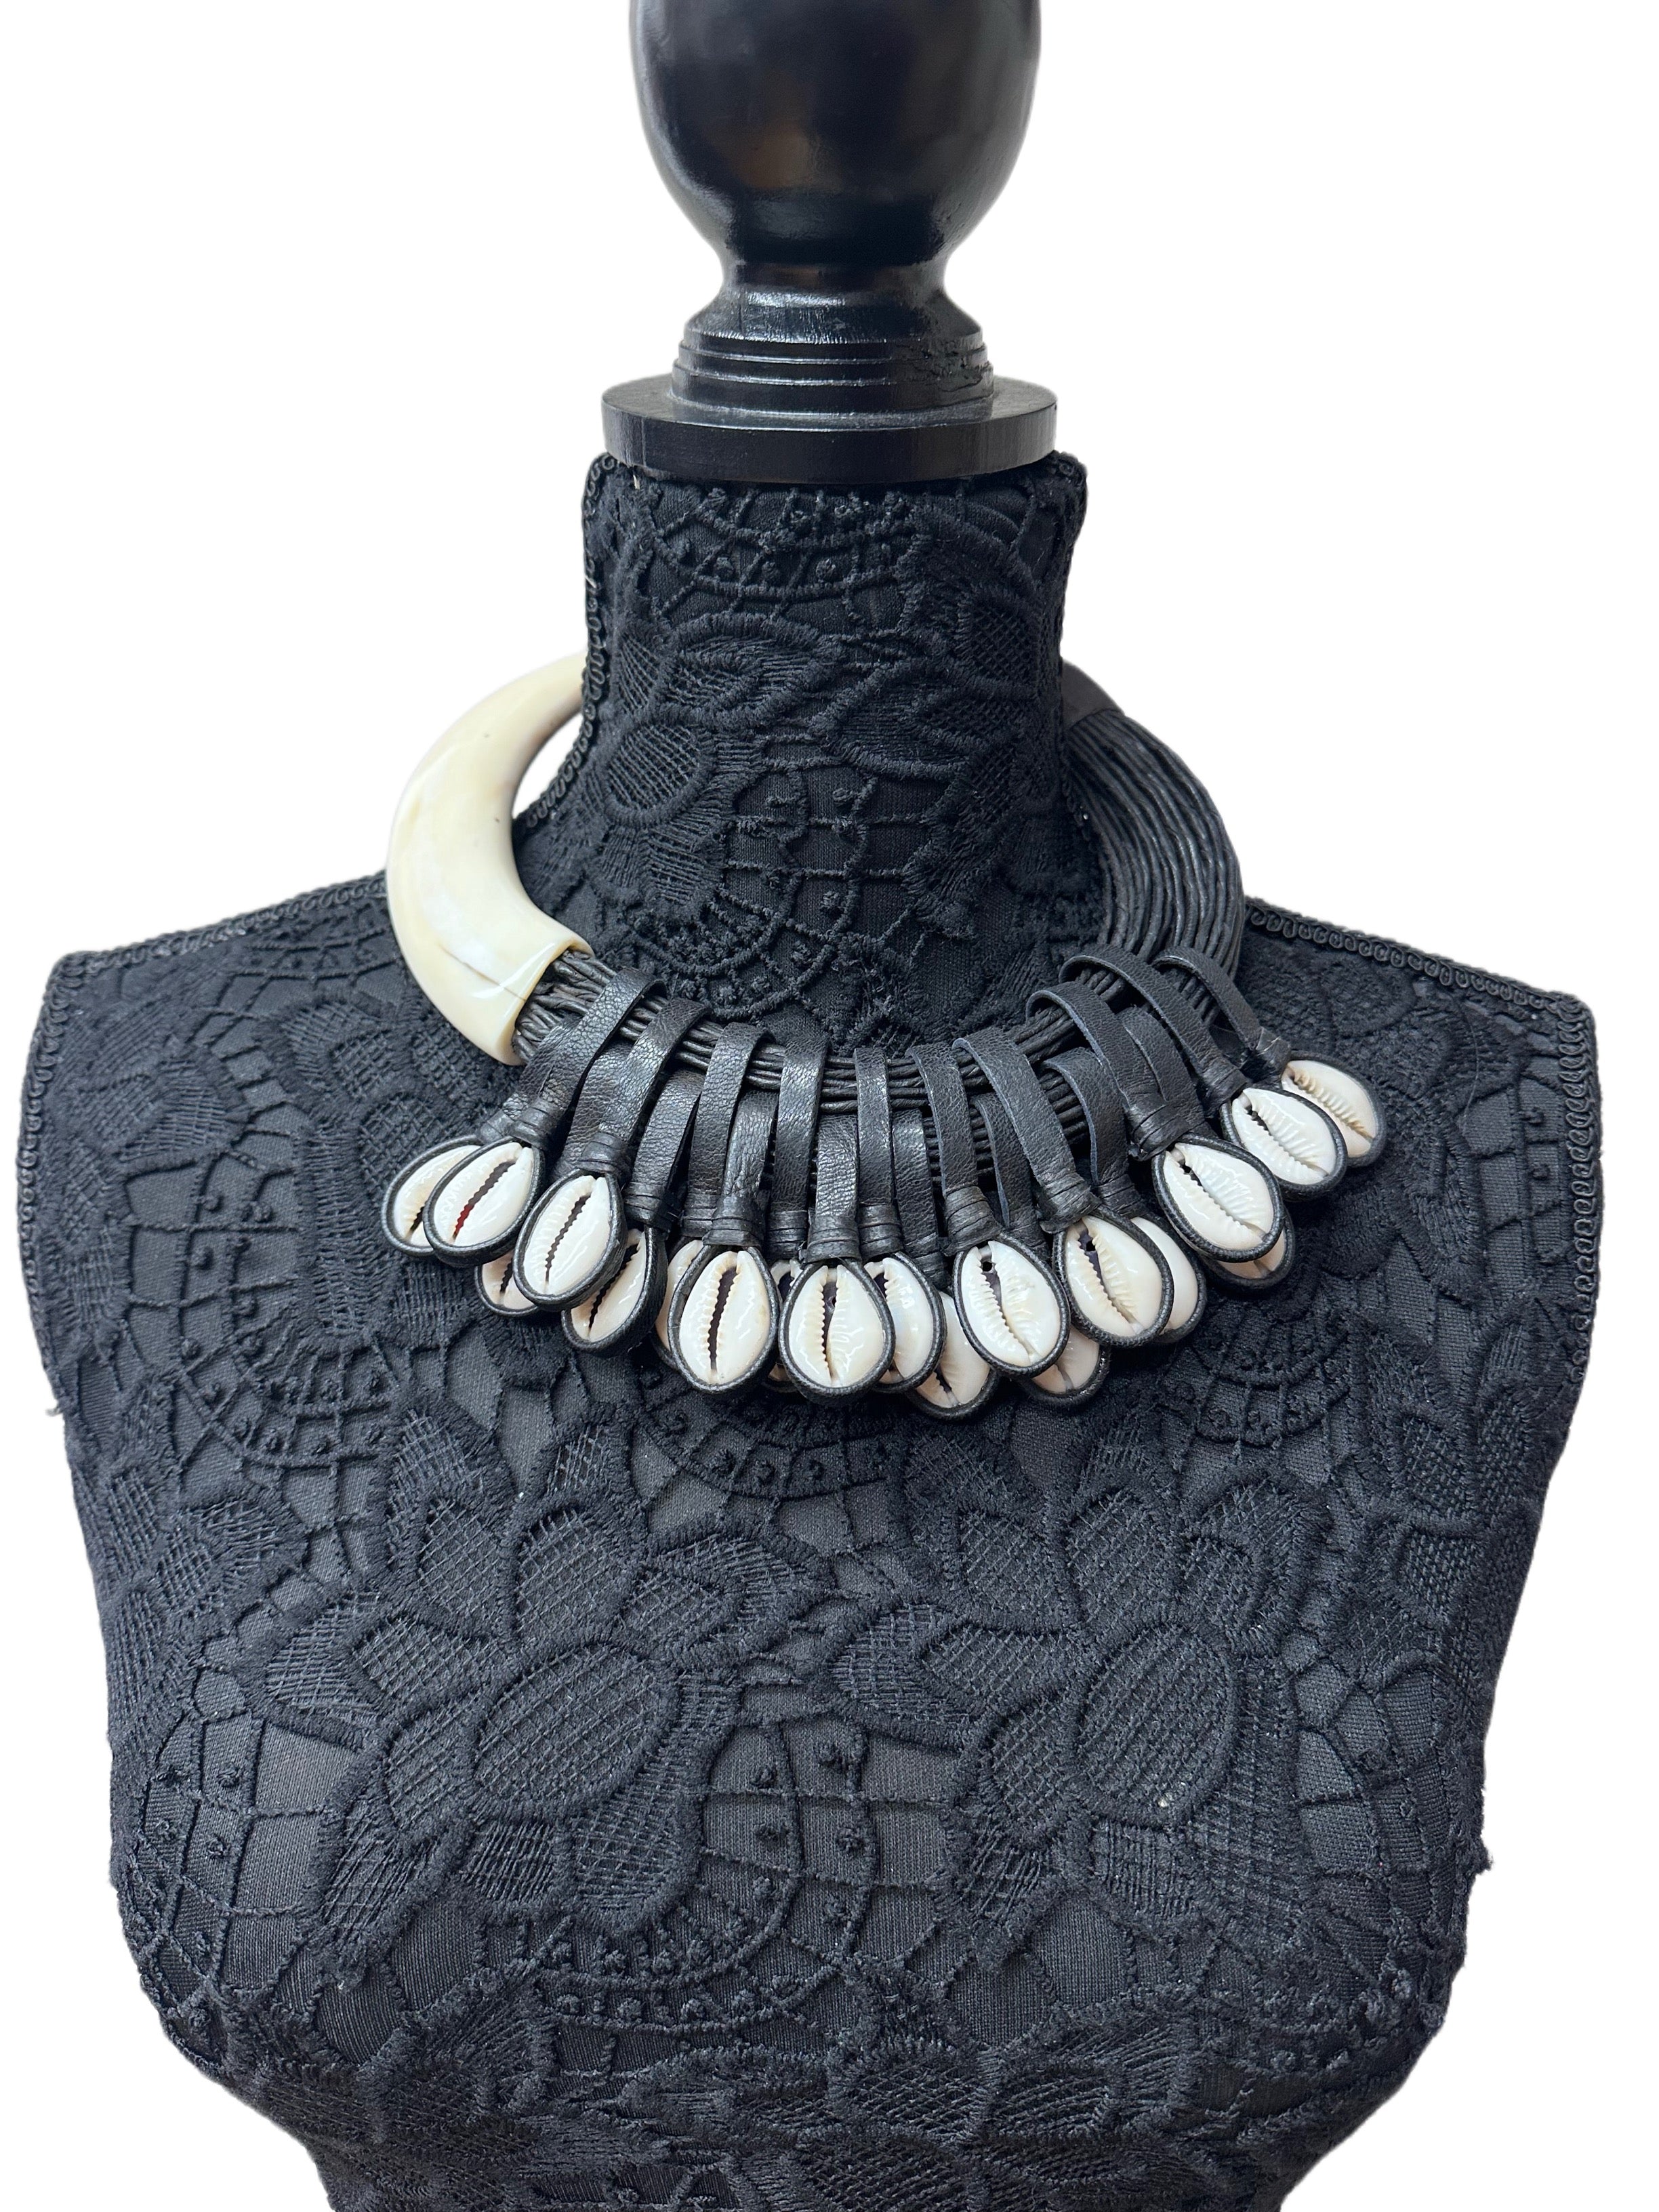 Handmade Bone Rolled Leather and Cowrie Shell Necklace